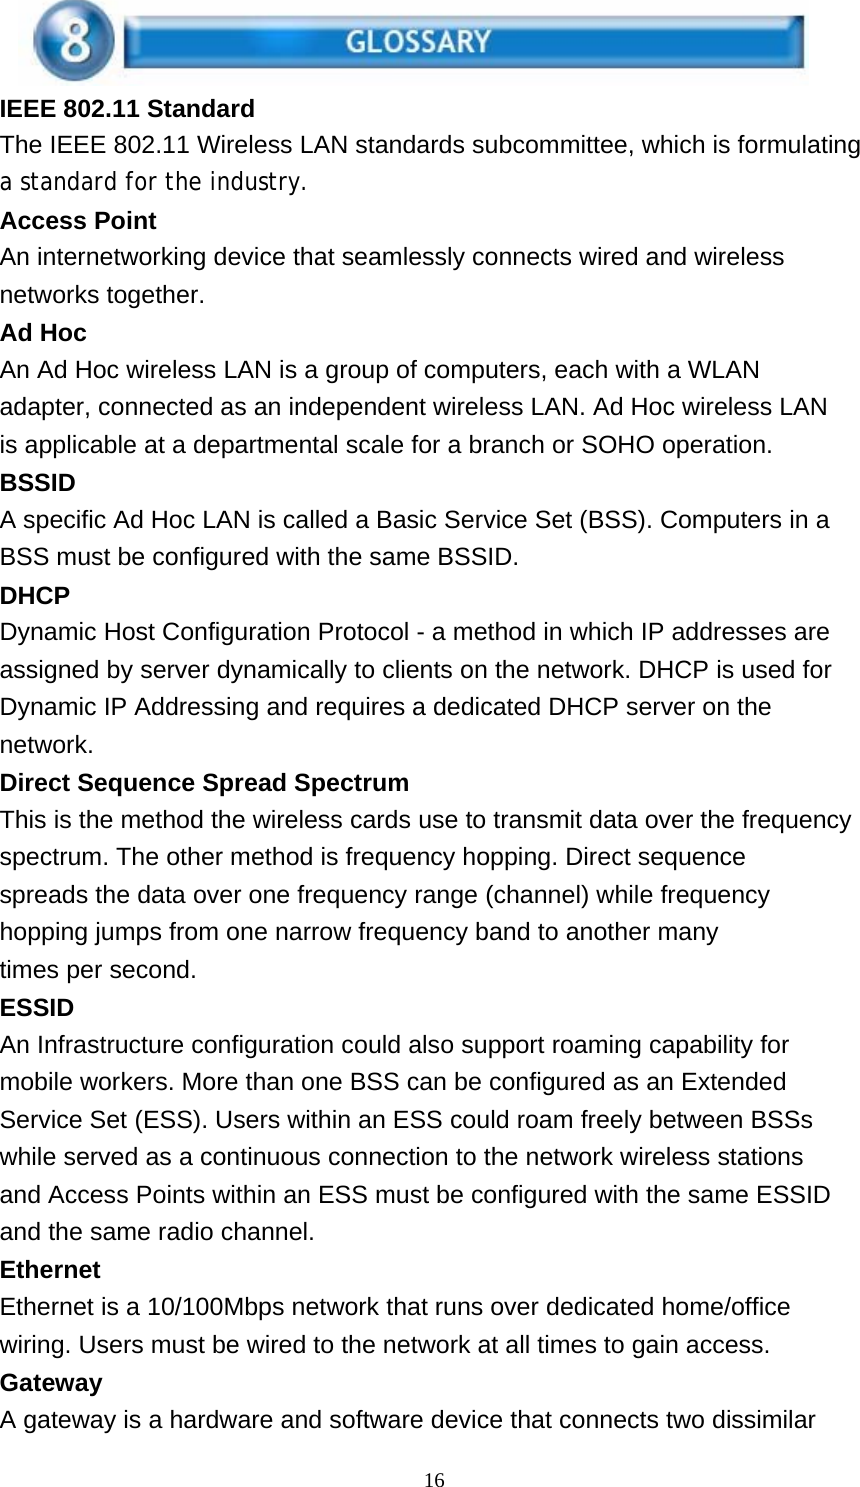   IEEE 802.11 Standard The IEEE 802.11 Wireless LAN standards subcommittee, which is formulating a standard for the industry. Access Point An internetworking device that seamlessly connects wired and wireless networks together. Ad Hoc An Ad Hoc wireless LAN is a group of computers, each with a WLAN adapter, connected as an independent wireless LAN. Ad Hoc wireless LAN is applicable at a departmental scale for a branch or SOHO operation. BSSID A specific Ad Hoc LAN is called a Basic Service Set (BSS). Computers in a BSS must be configured with the same BSSID. DHCP Dynamic Host Configuration Protocol - a method in which IP addresses are assigned by server dynamically to clients on the network. DHCP is used for Dynamic IP Addressing and requires a dedicated DHCP server on the network. Direct Sequence Spread Spectrum This is the method the wireless cards use to transmit data over the frequency spectrum. The other method is frequency hopping. Direct sequence spreads the data over one frequency range (channel) while frequency hopping jumps from one narrow frequency band to another many times per second. ESSID An Infrastructure configuration could also support roaming capability for mobile workers. More than one BSS can be configured as an Extended Service Set (ESS). Users within an ESS could roam freely between BSSs while served as a continuous connection to the network wireless stations and Access Points within an ESS must be configured with the same ESSID and the same radio channel. Ethernet Ethernet is a 10/100Mbps network that runs over dedicated home/office wiring. Users must be wired to the network at all times to gain access. Gateway A gateway is a hardware and software device that connects two dissimilar 16  